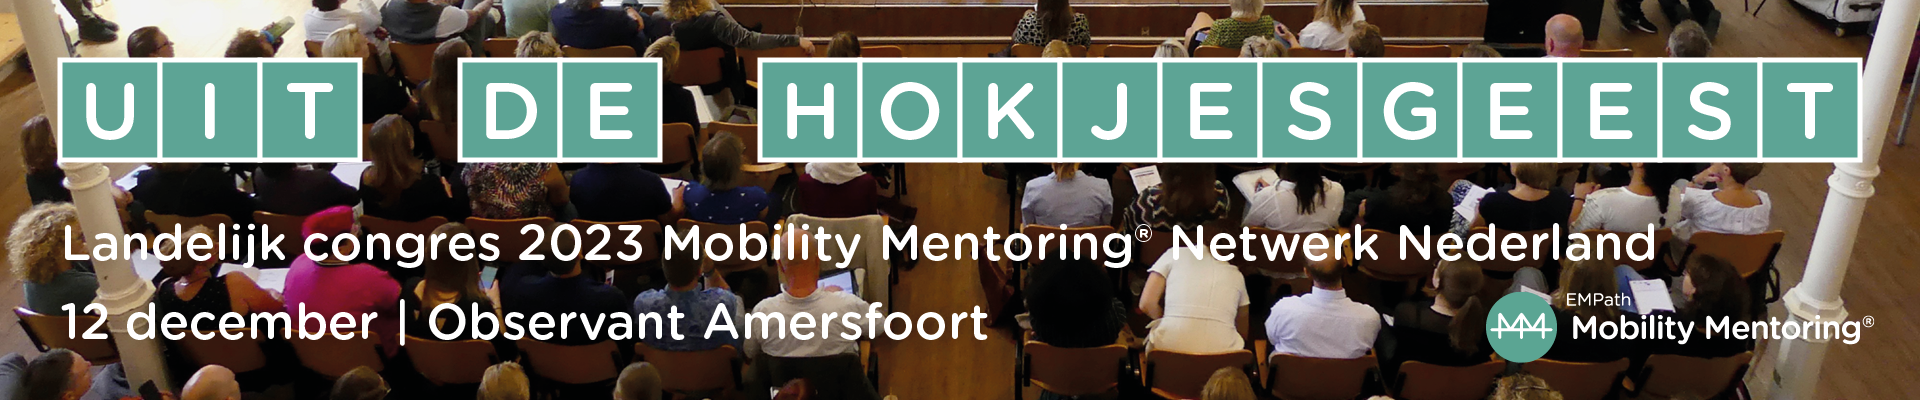 Mobility Mentoring